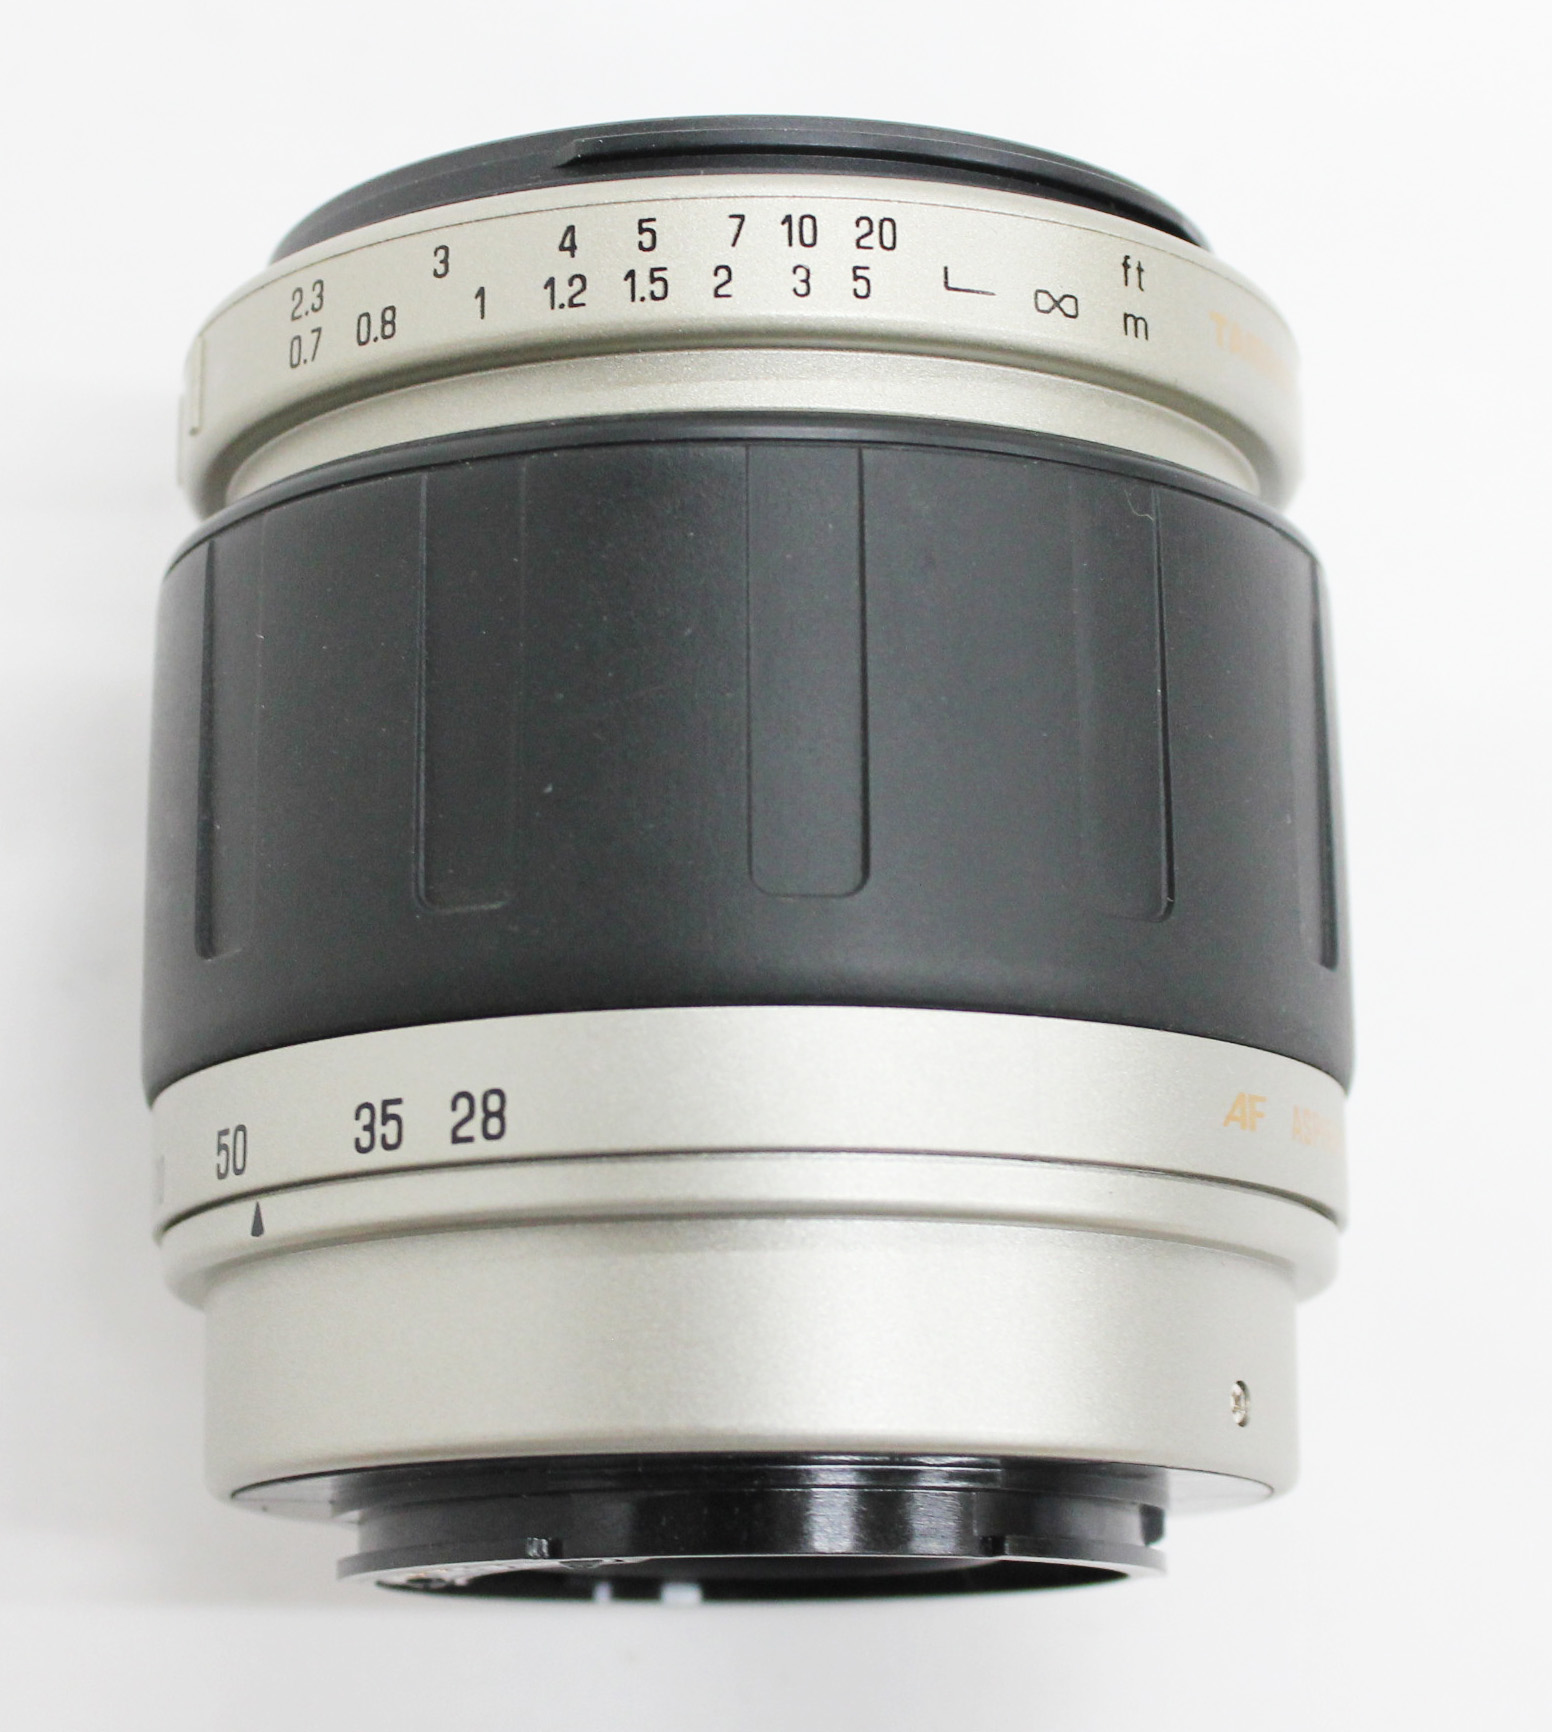  Tamron AF 28-80mm F/3.5-5.6 Lens with Hood for Minolta/Sony A Mount from Japan Photo 3